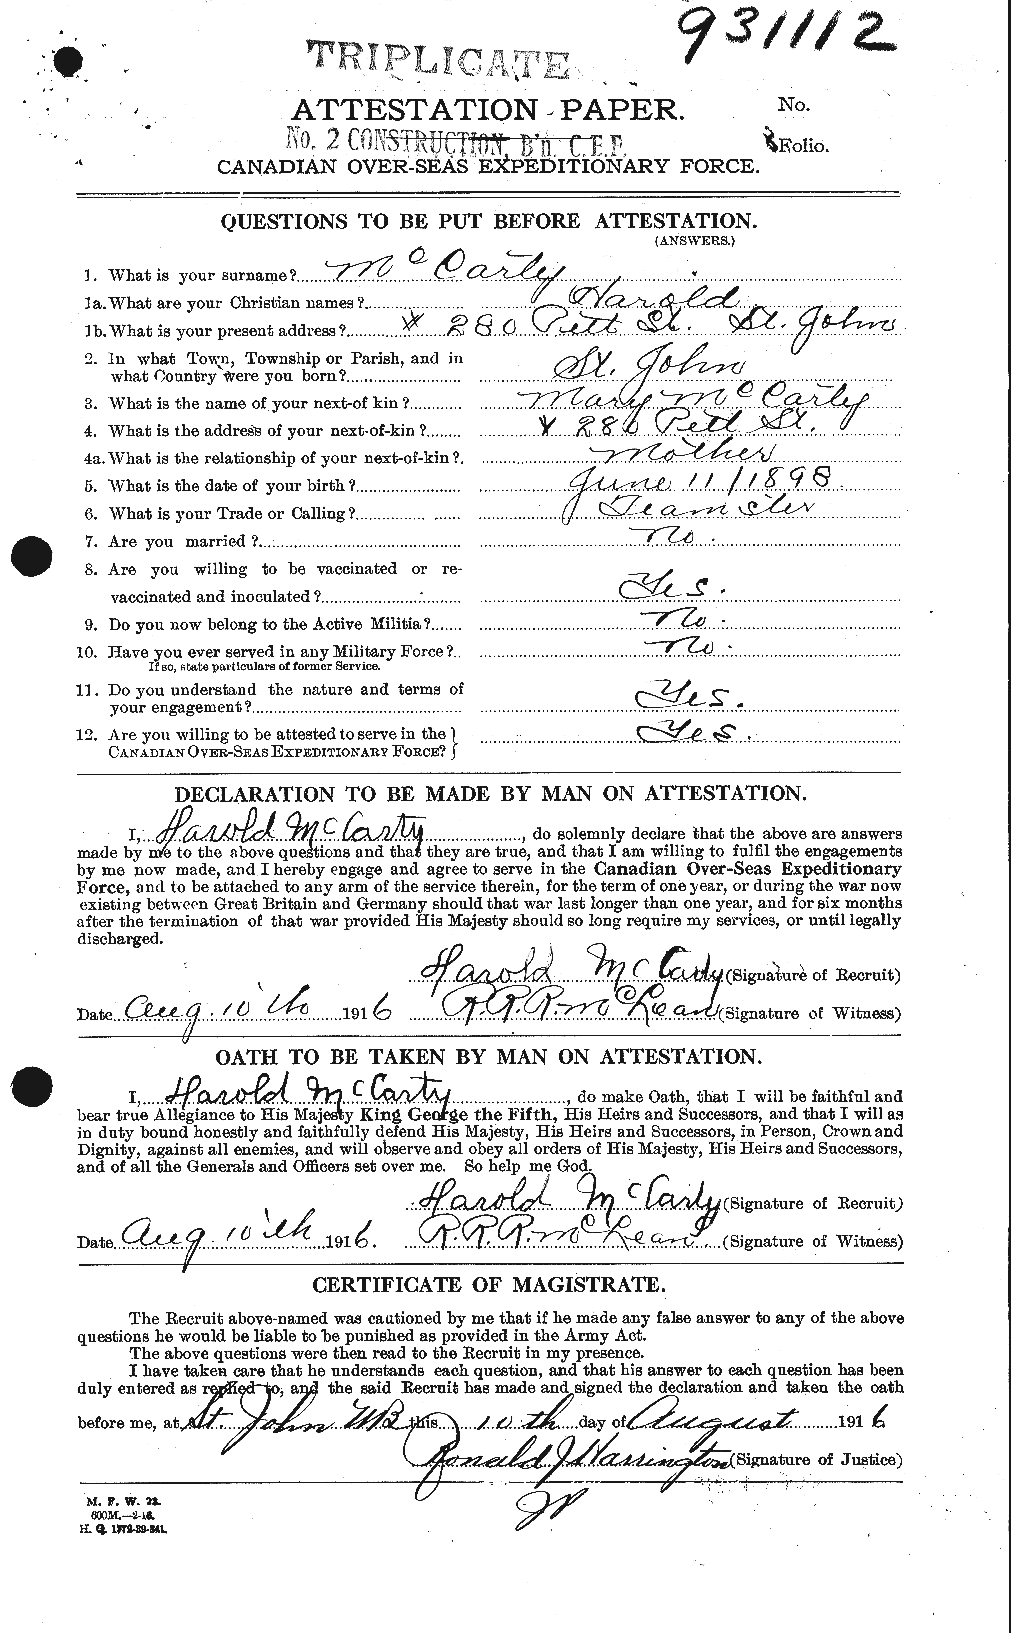 Personnel Records of the First World War - CEF 133501a